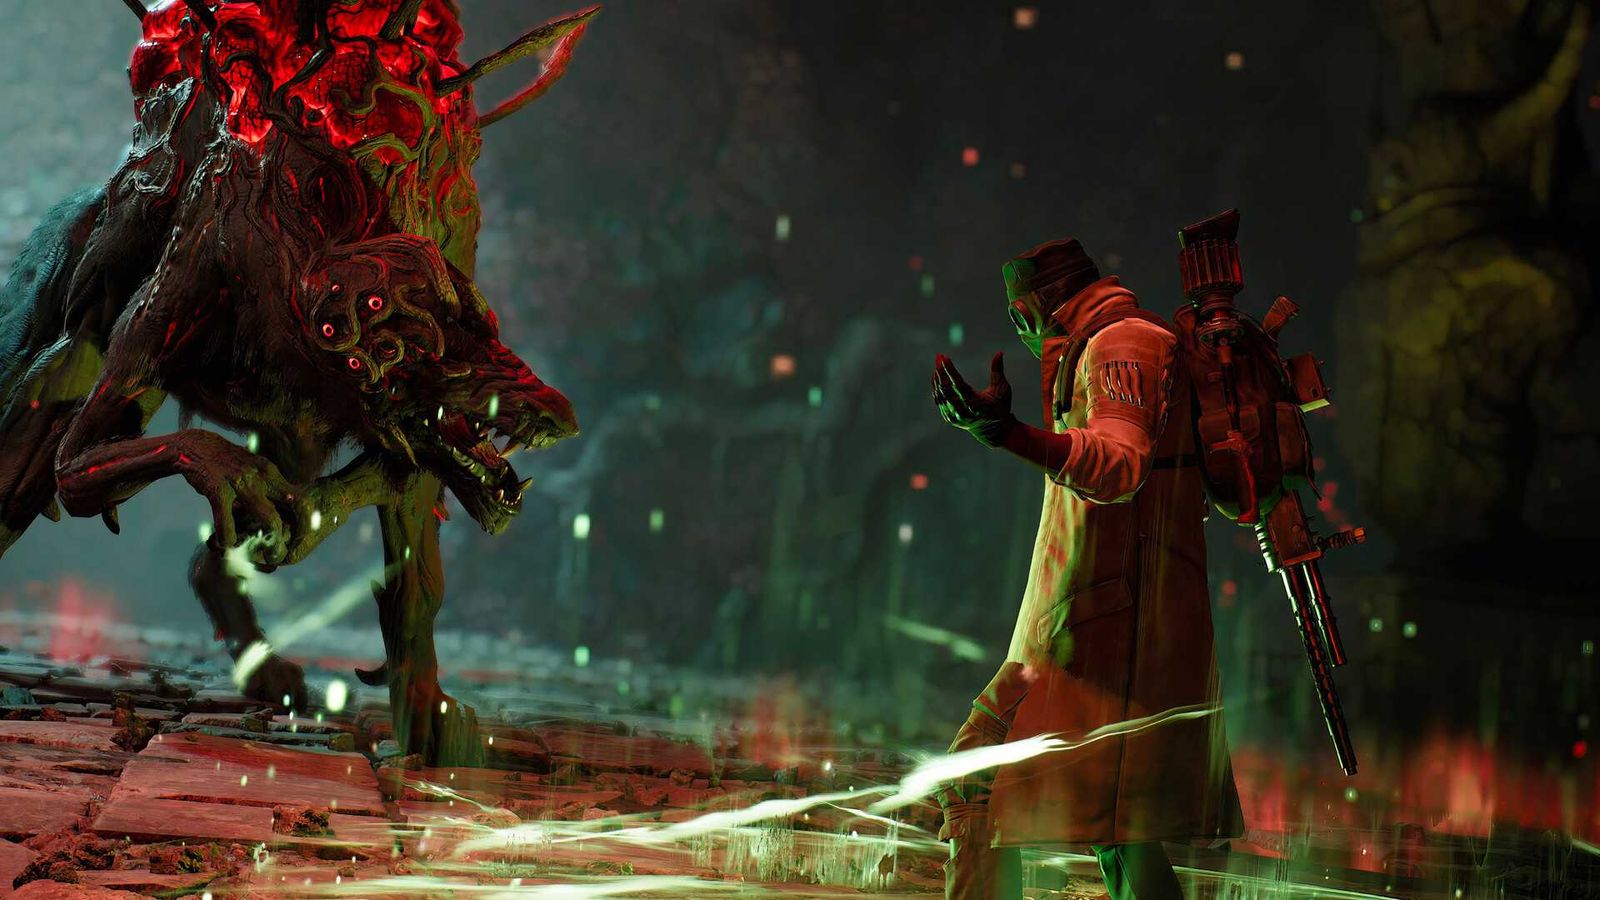 The player character fighting an enemy in Remnant 2.